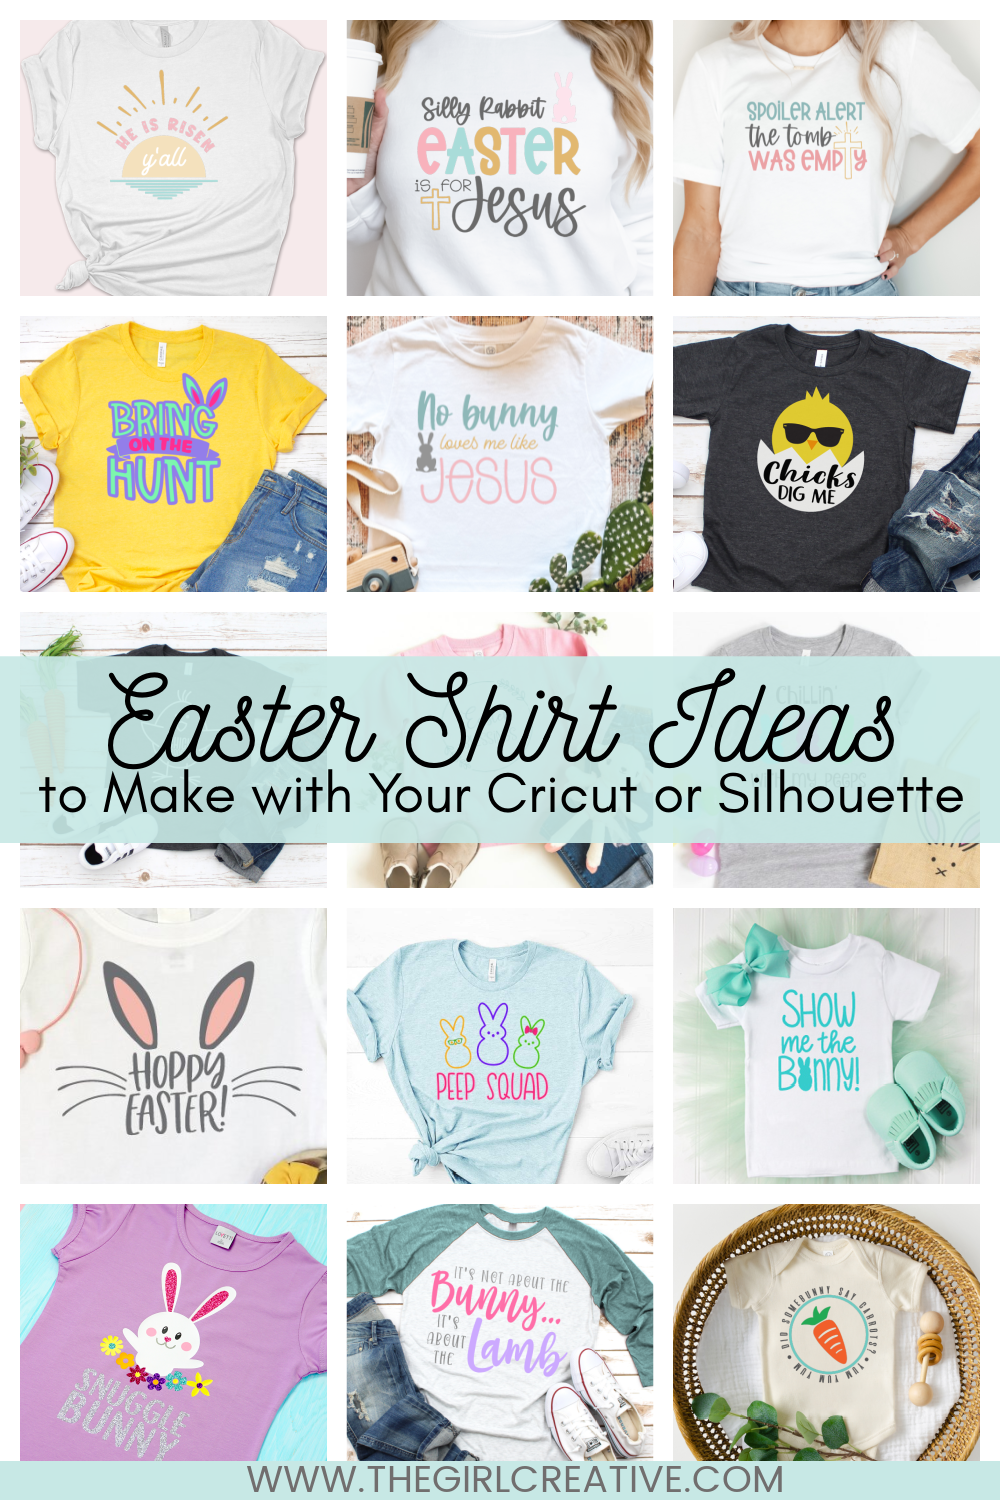 19 Easter Shirt Ideas to Make with Your Cricut - The Girl Creative